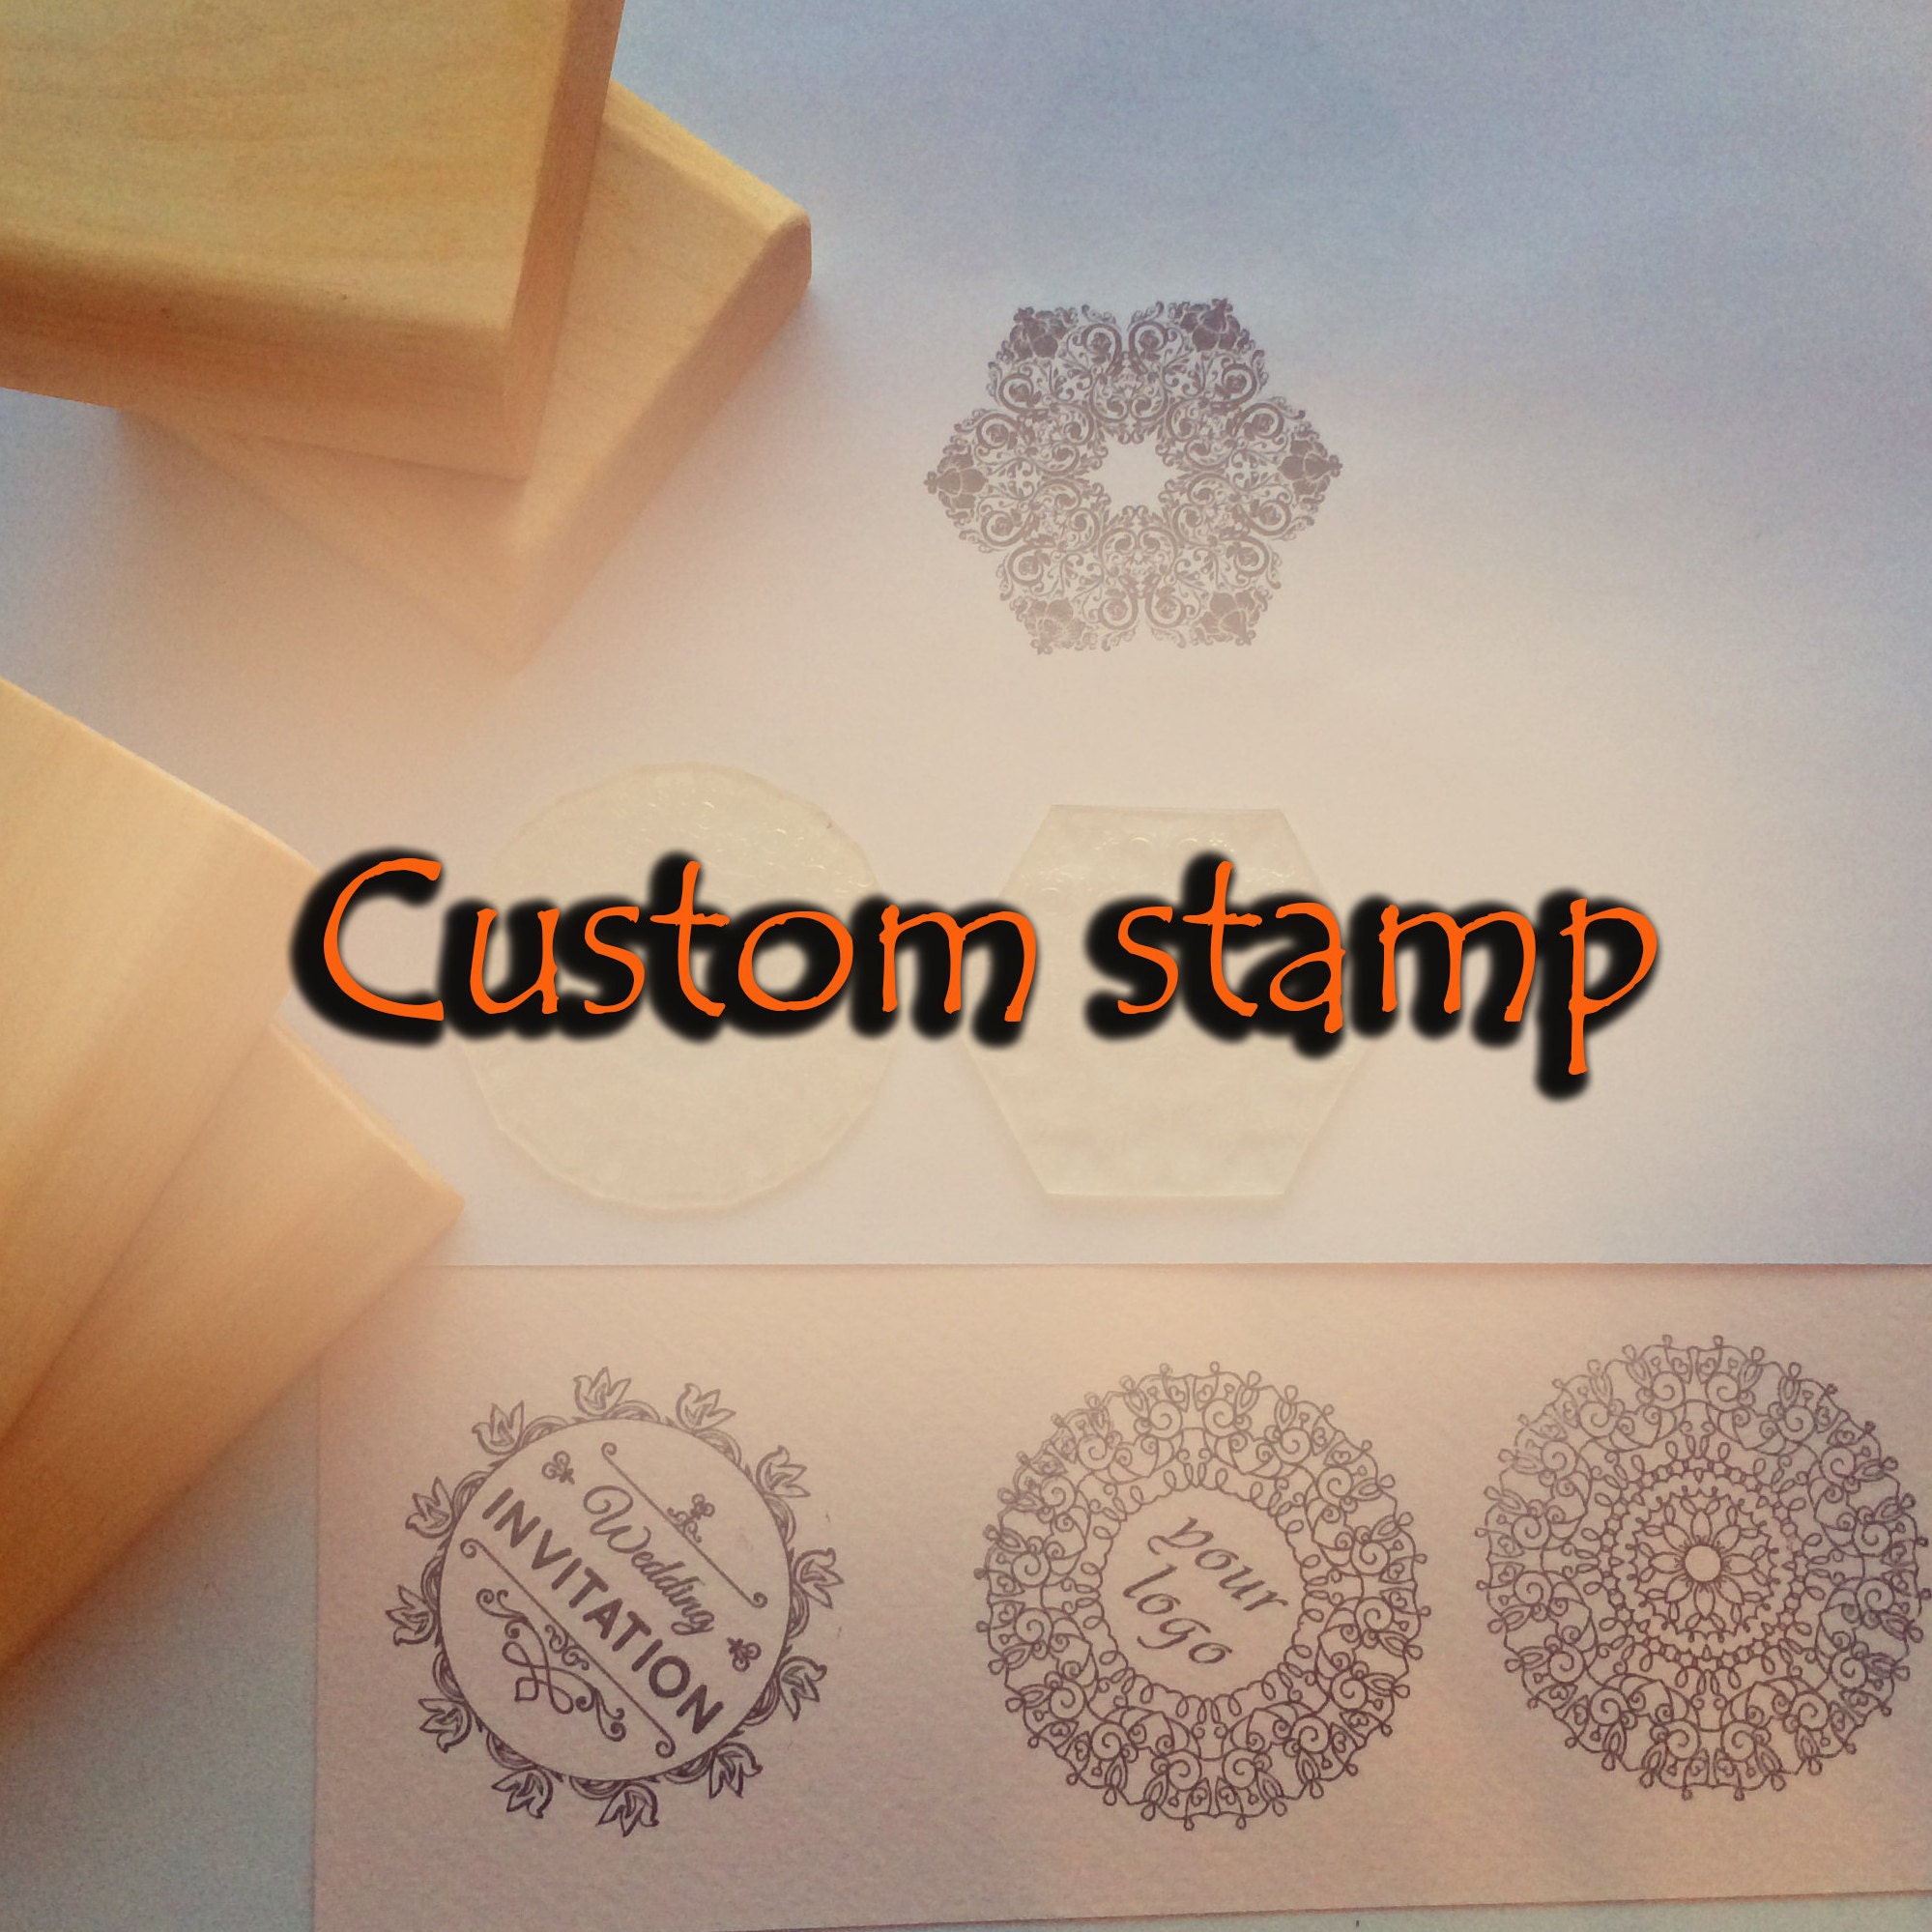 stamp set of 6 size 3/4x3/4 with wooden tray Egyptian hieroglyphic symbols Paper-Crafting 19mm Scrapbooking Card Making